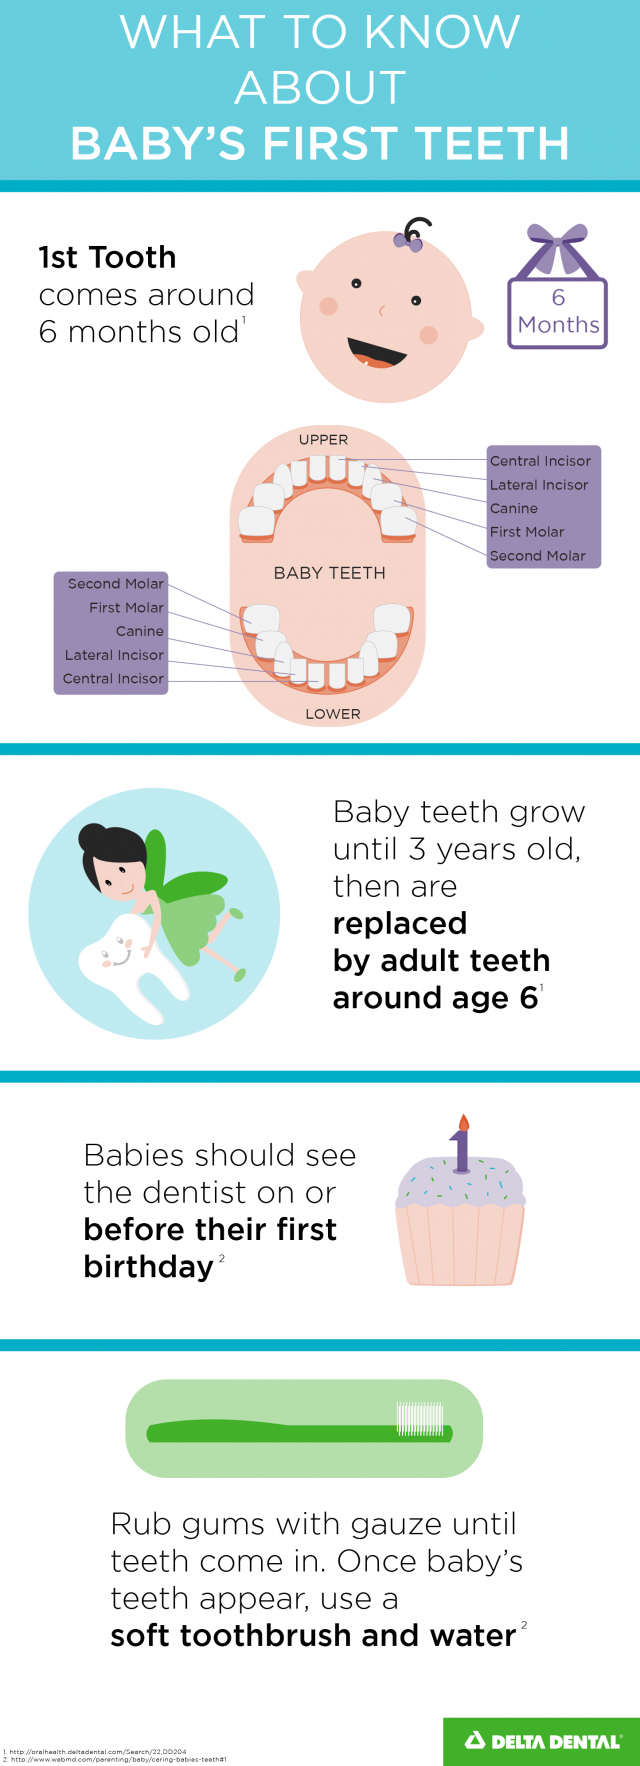 What to know about baby's first teeth infographic